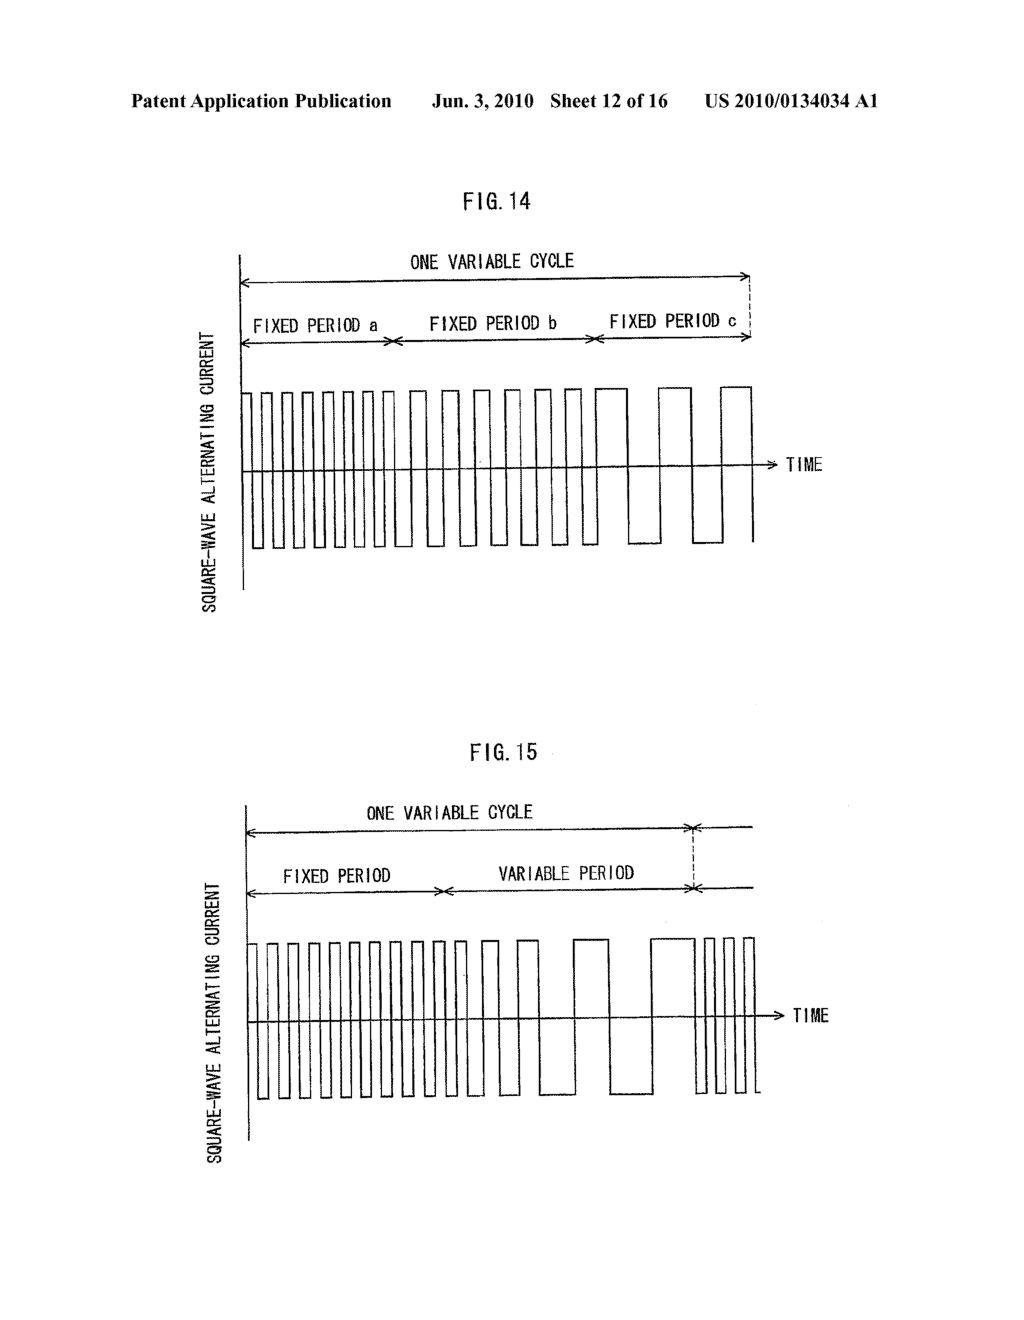 HIGH-PRESSURE DISCHARGE LAMP LIGHTING DEVICE WITH ALTERNATING CURRENT FREQUENCY TIME PERIODS - diagram, schematic, and image 13